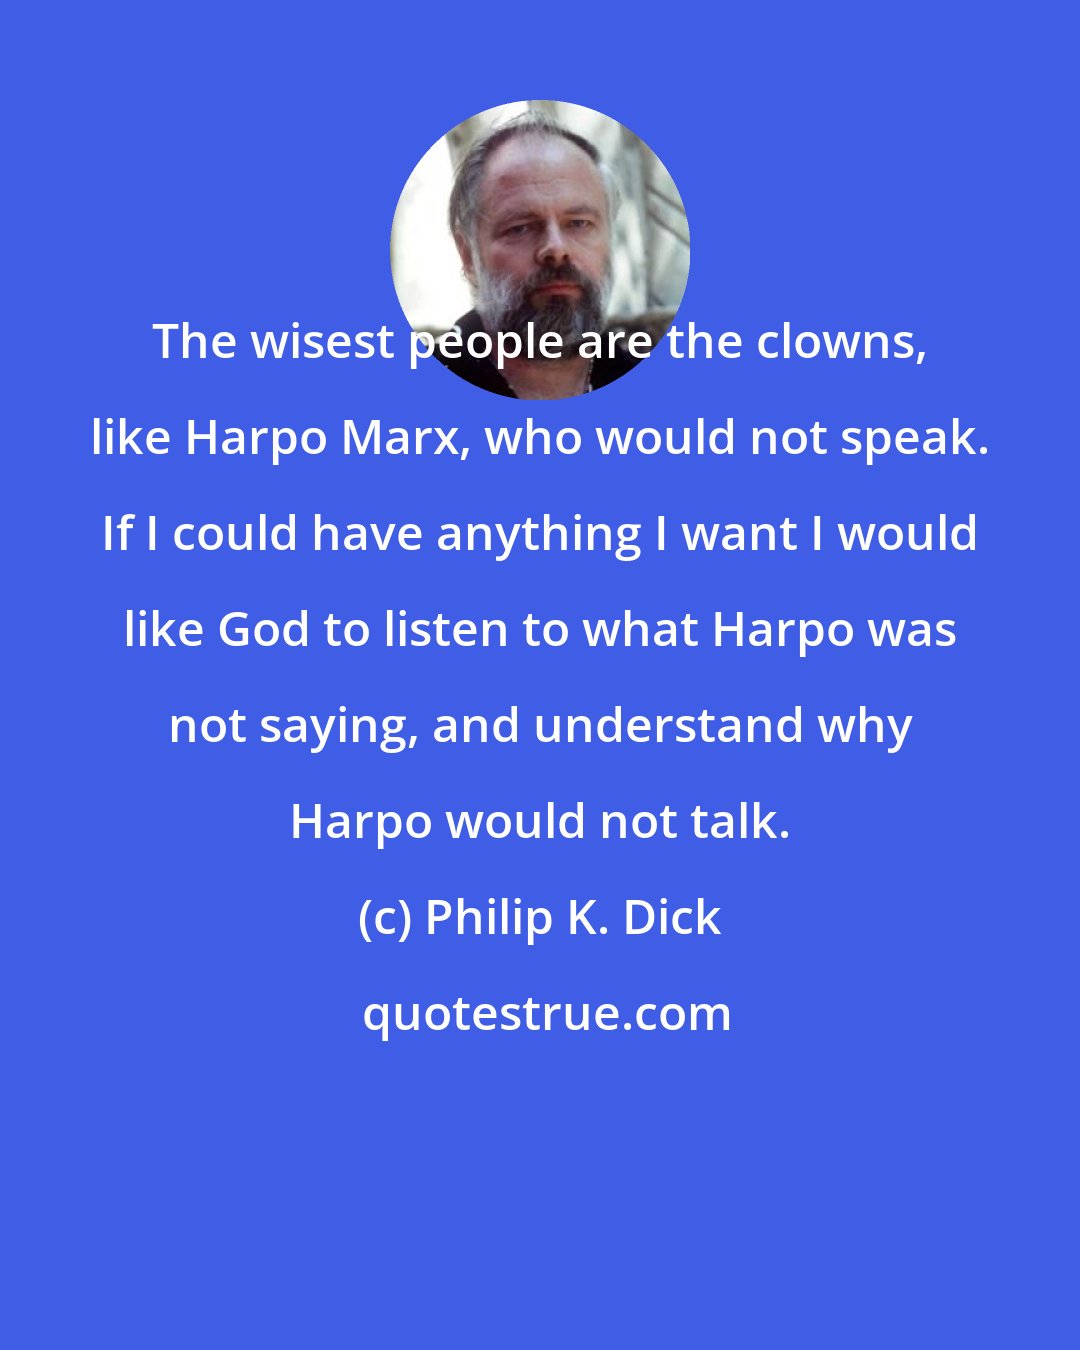 Philip K. Dick: The wisest people are the clowns, like Harpo Marx, who would not speak. If I could have anything I want I would like God to listen to what Harpo was not saying, and understand why Harpo would not talk.